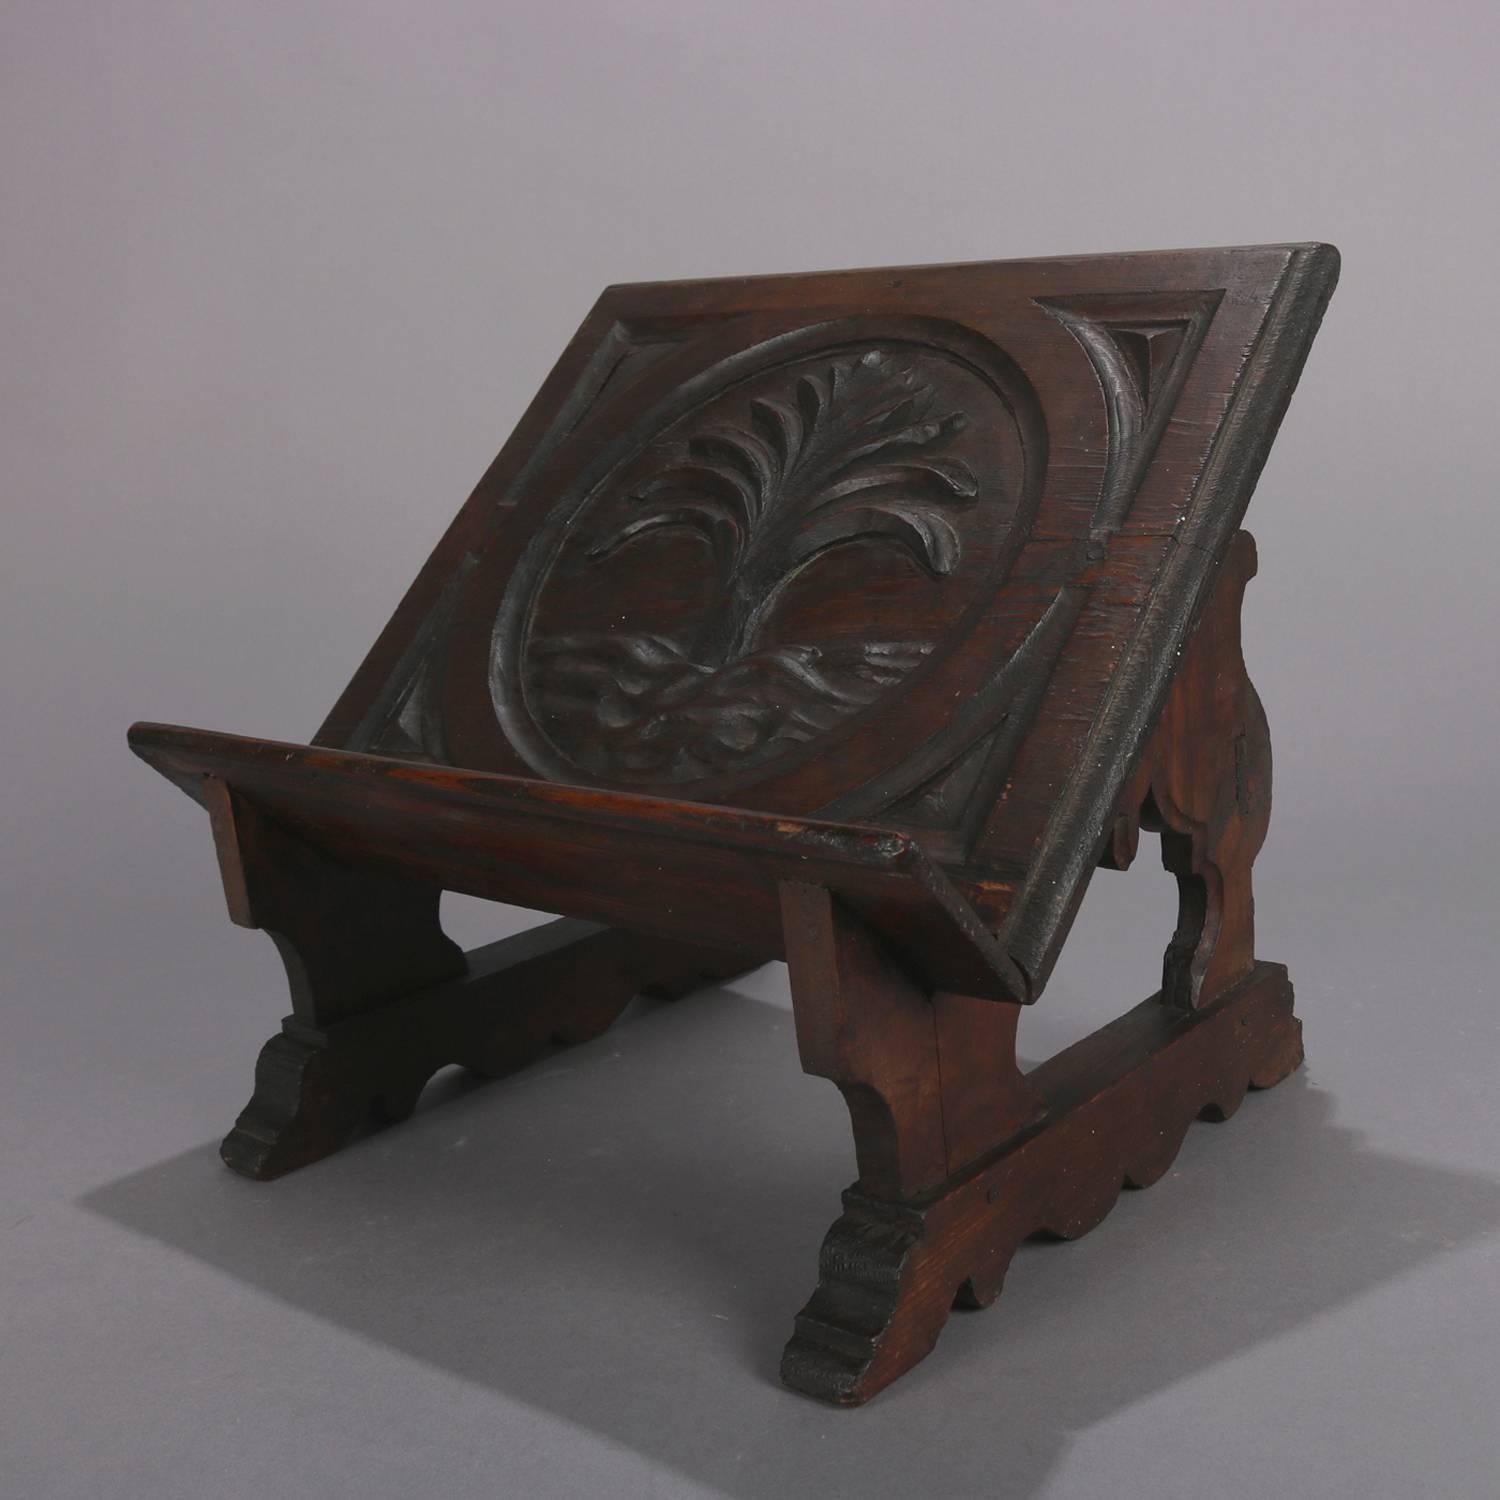 Antique Bible stand features hand-carved pine construction with central stylized tree of life tray seated on scroll and foliate form base, 18th century.

Measures: 12